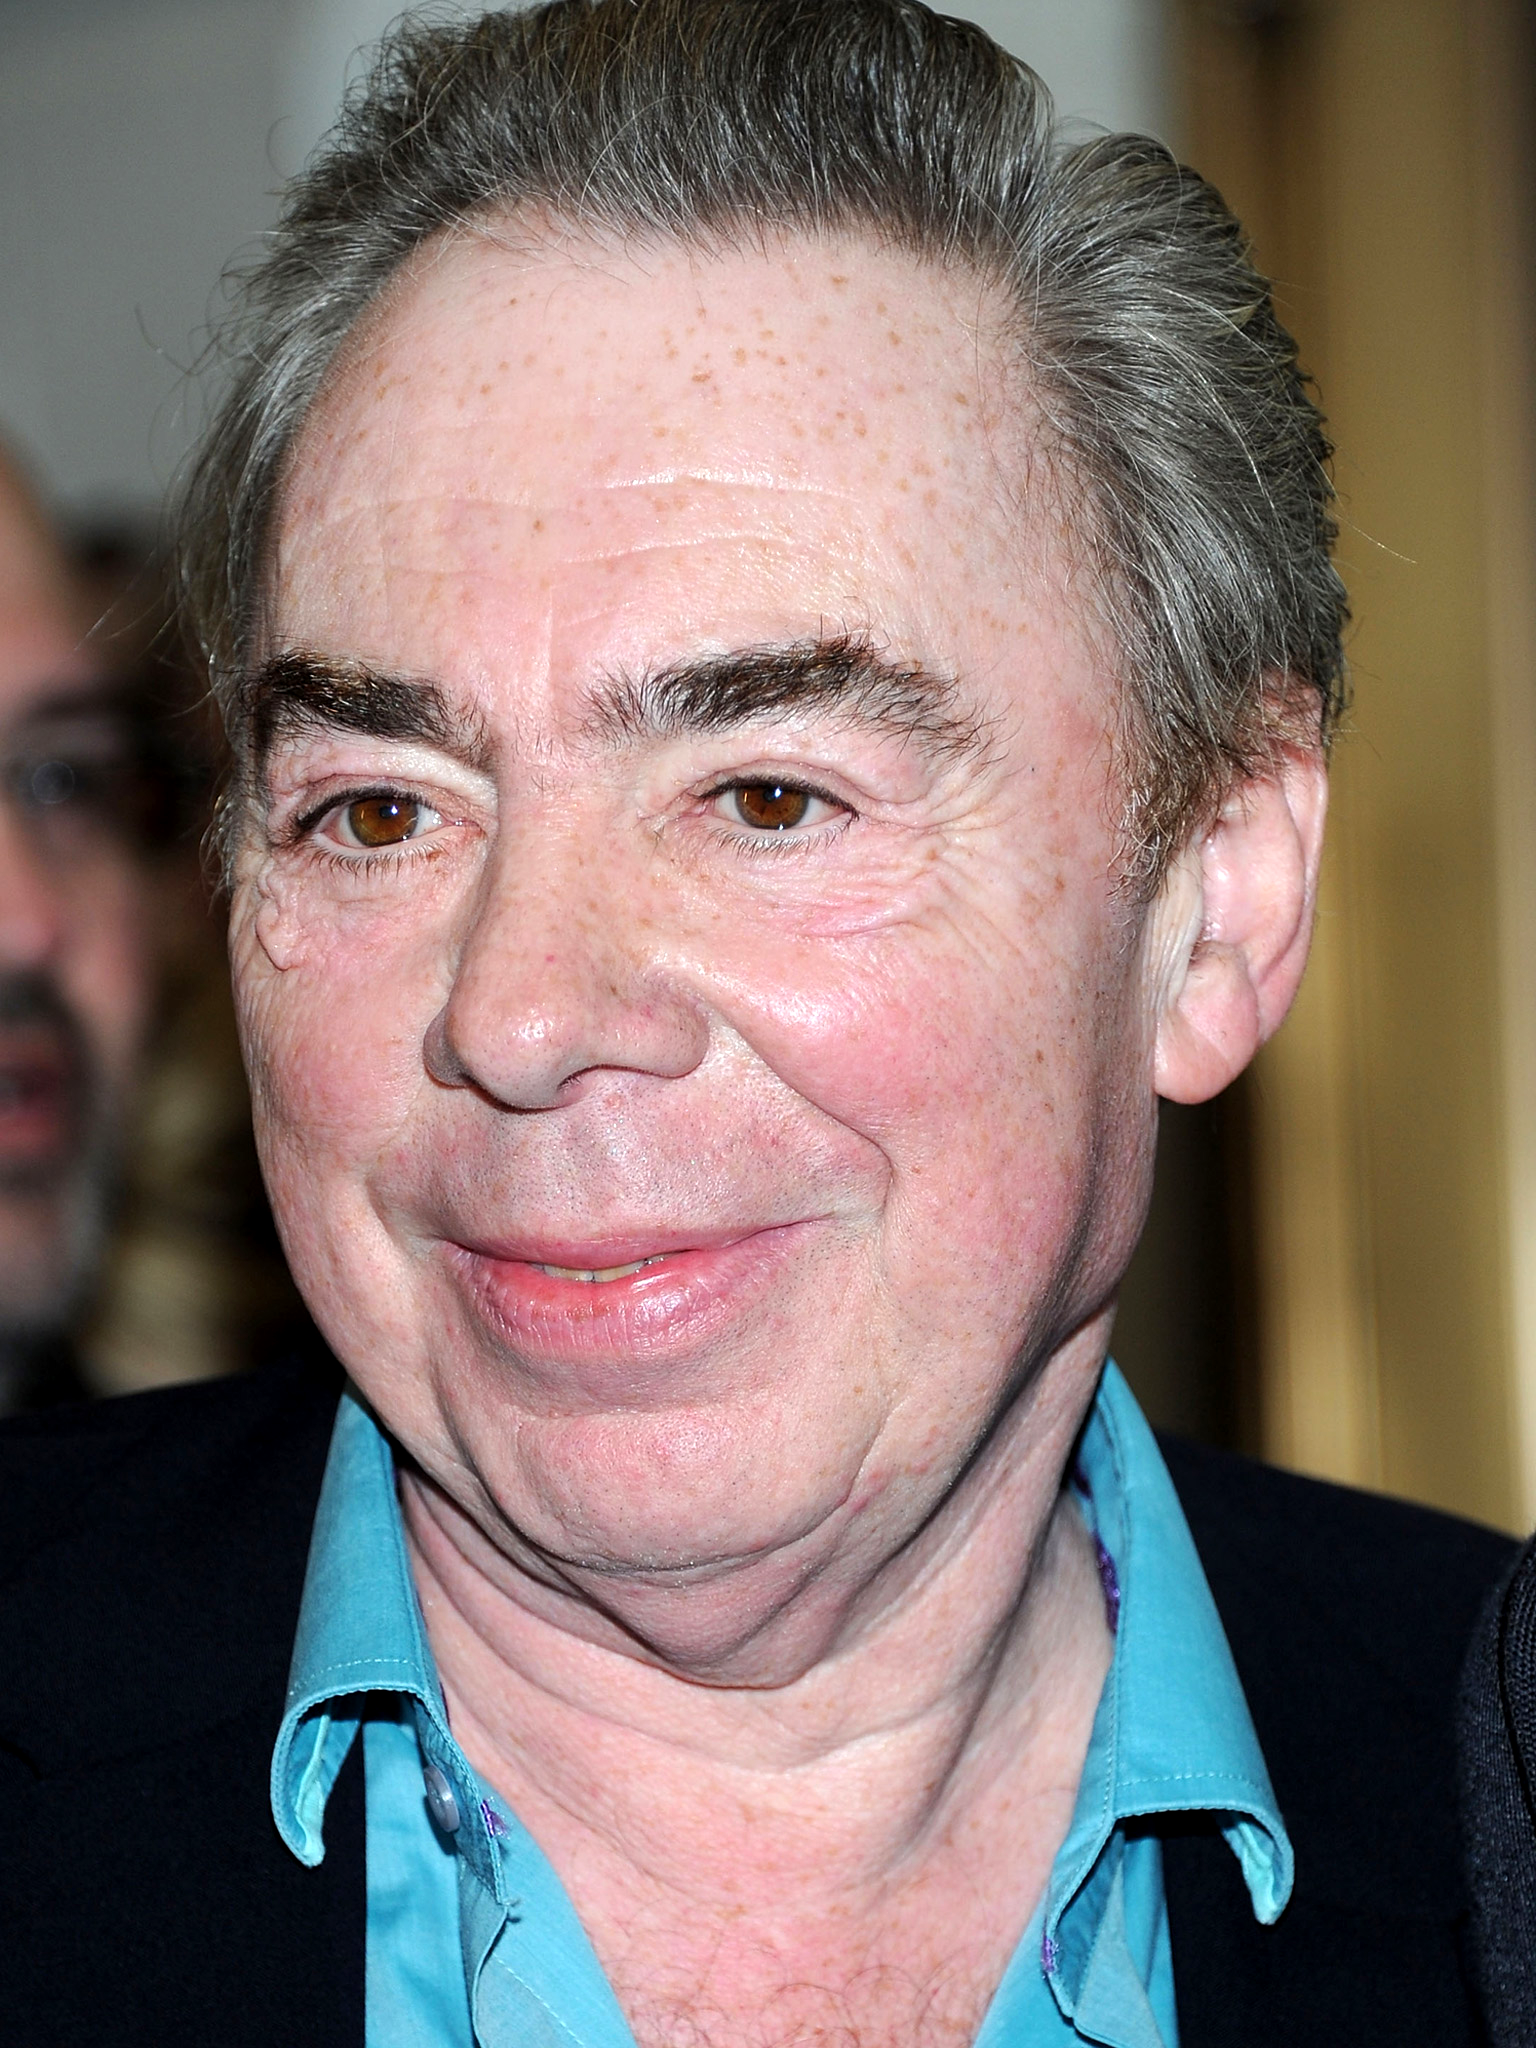 Lord Lloyd-Webber's scheme will provide instruments for children from schools in deprived areas